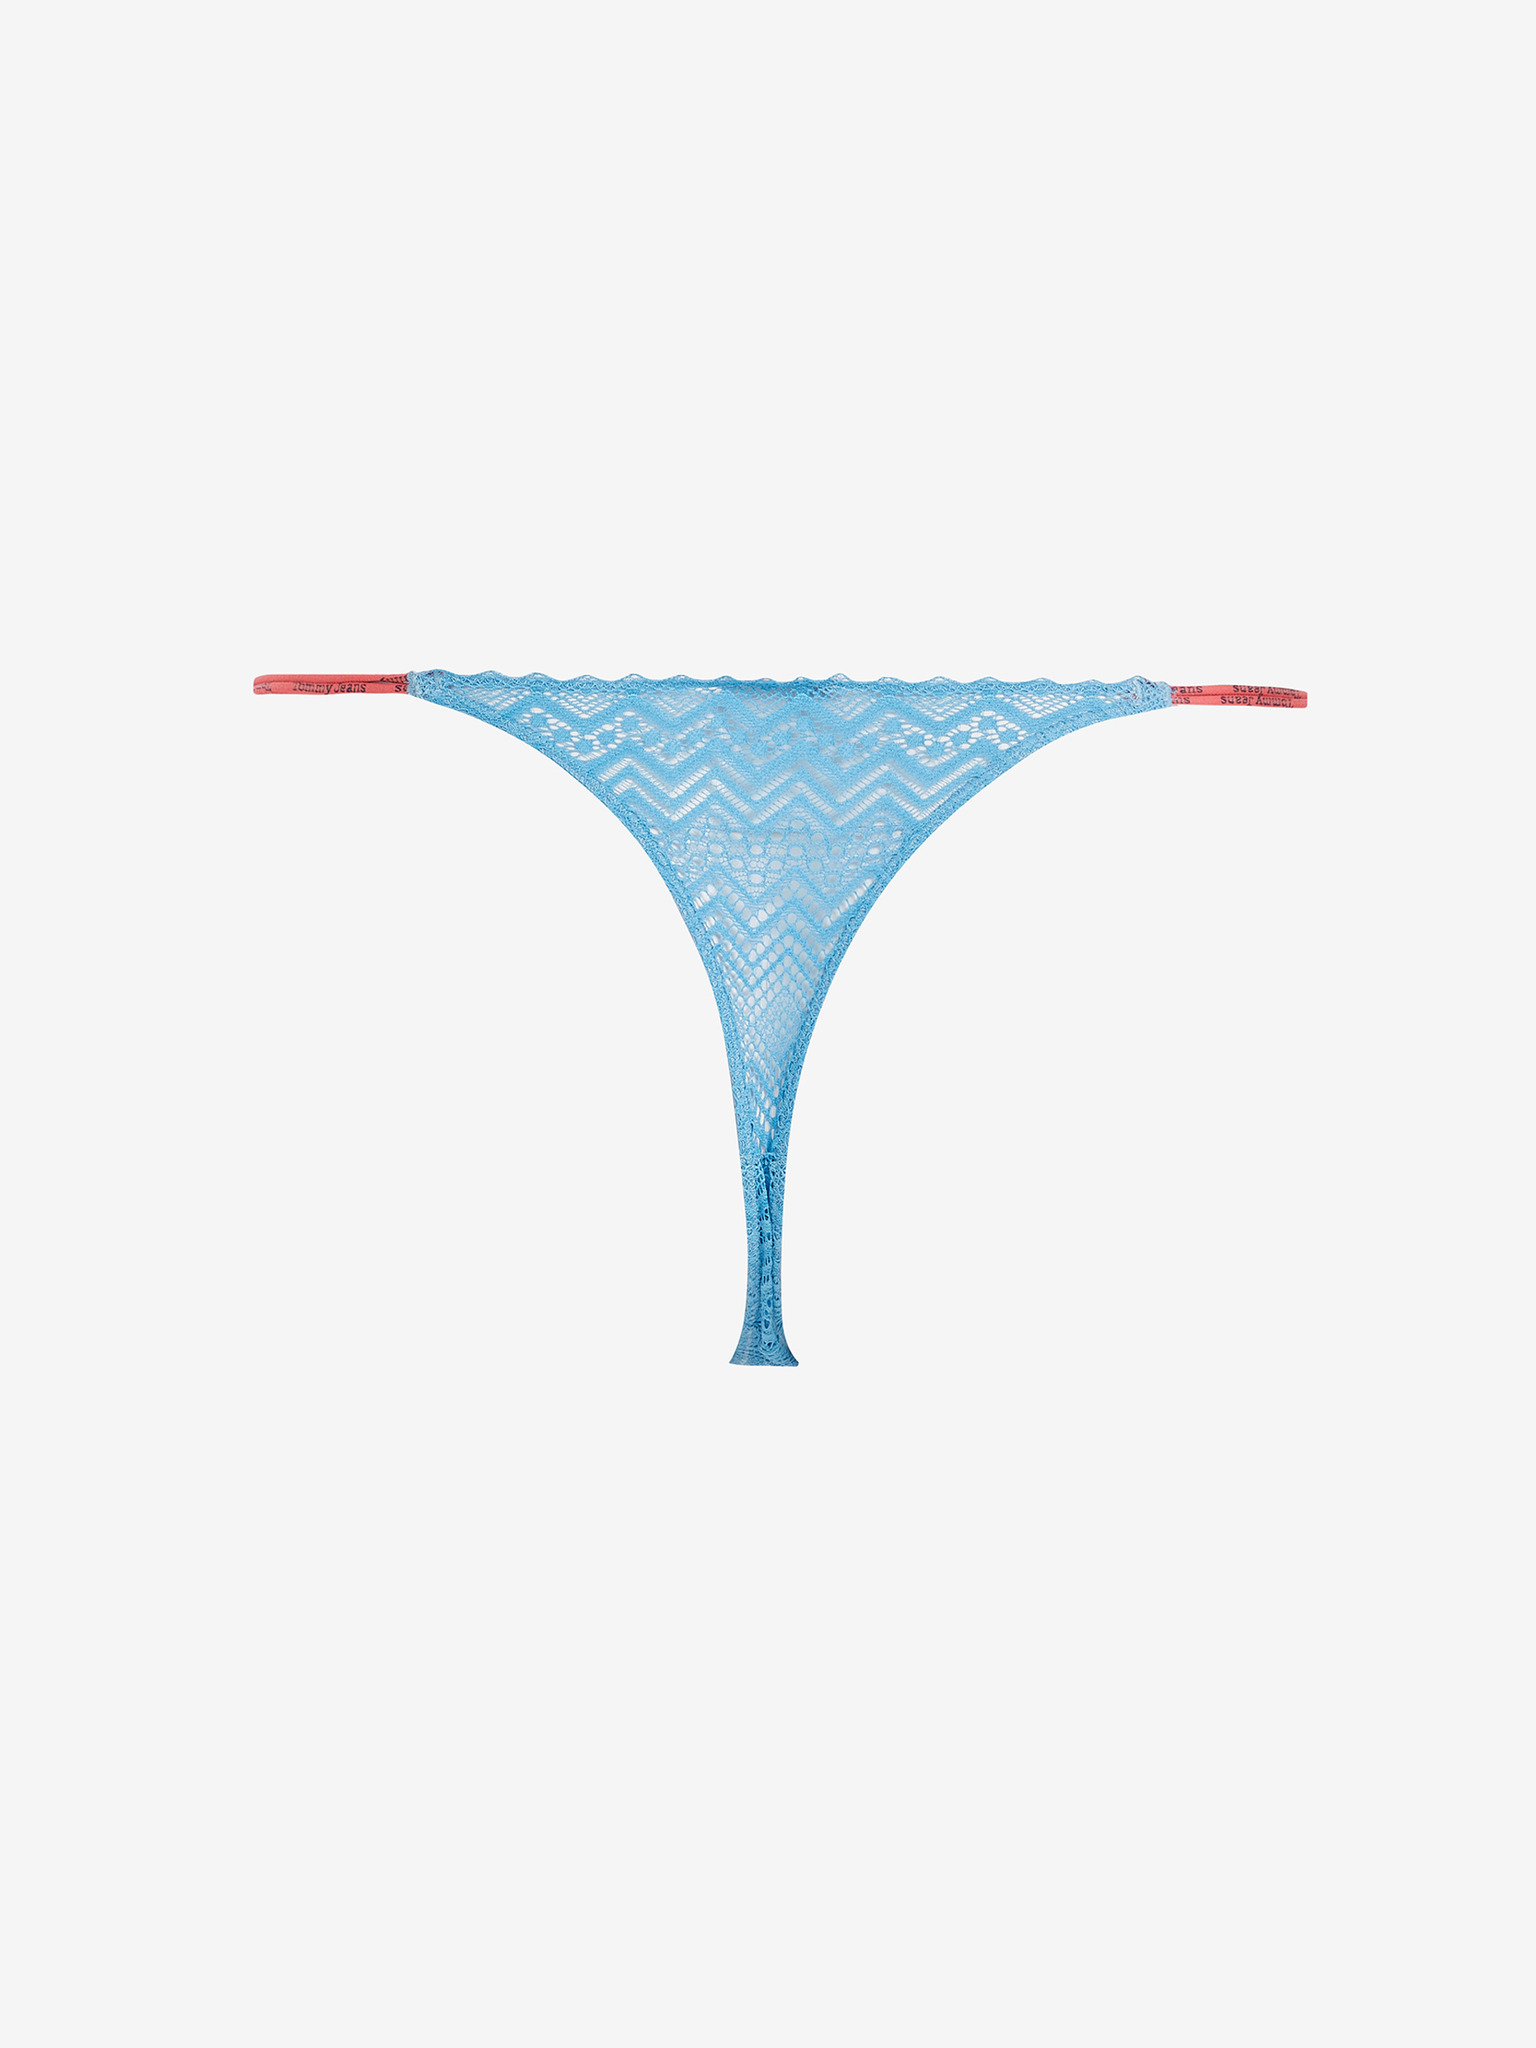 Tommy Hilfiger Thong Panties Underwear - Lace